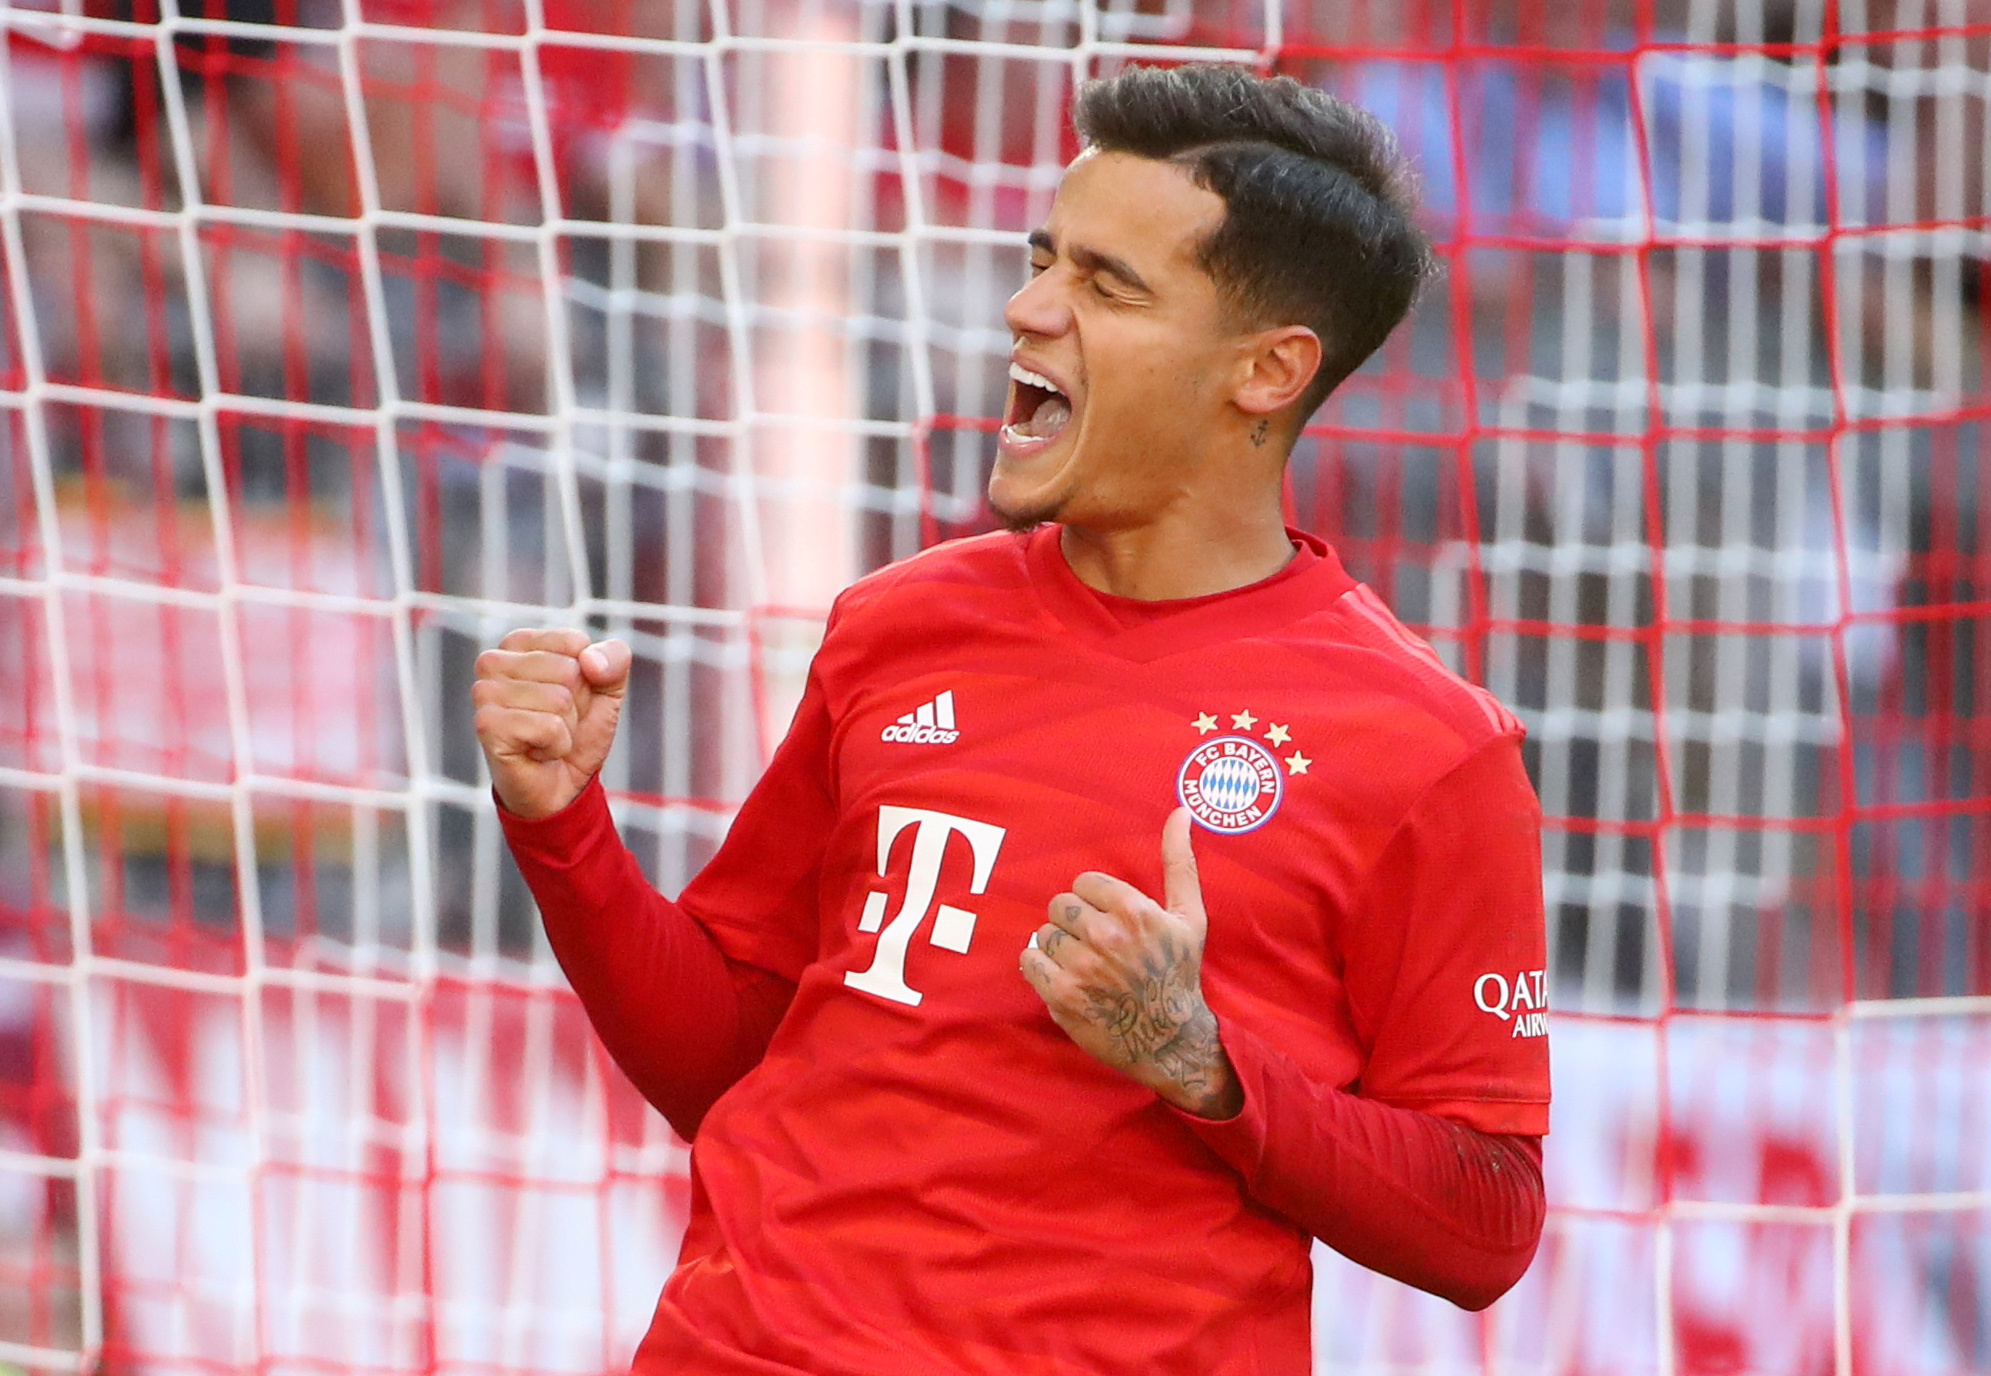 Top 5 players to keep an eye on in Bundesliga in 2019-20